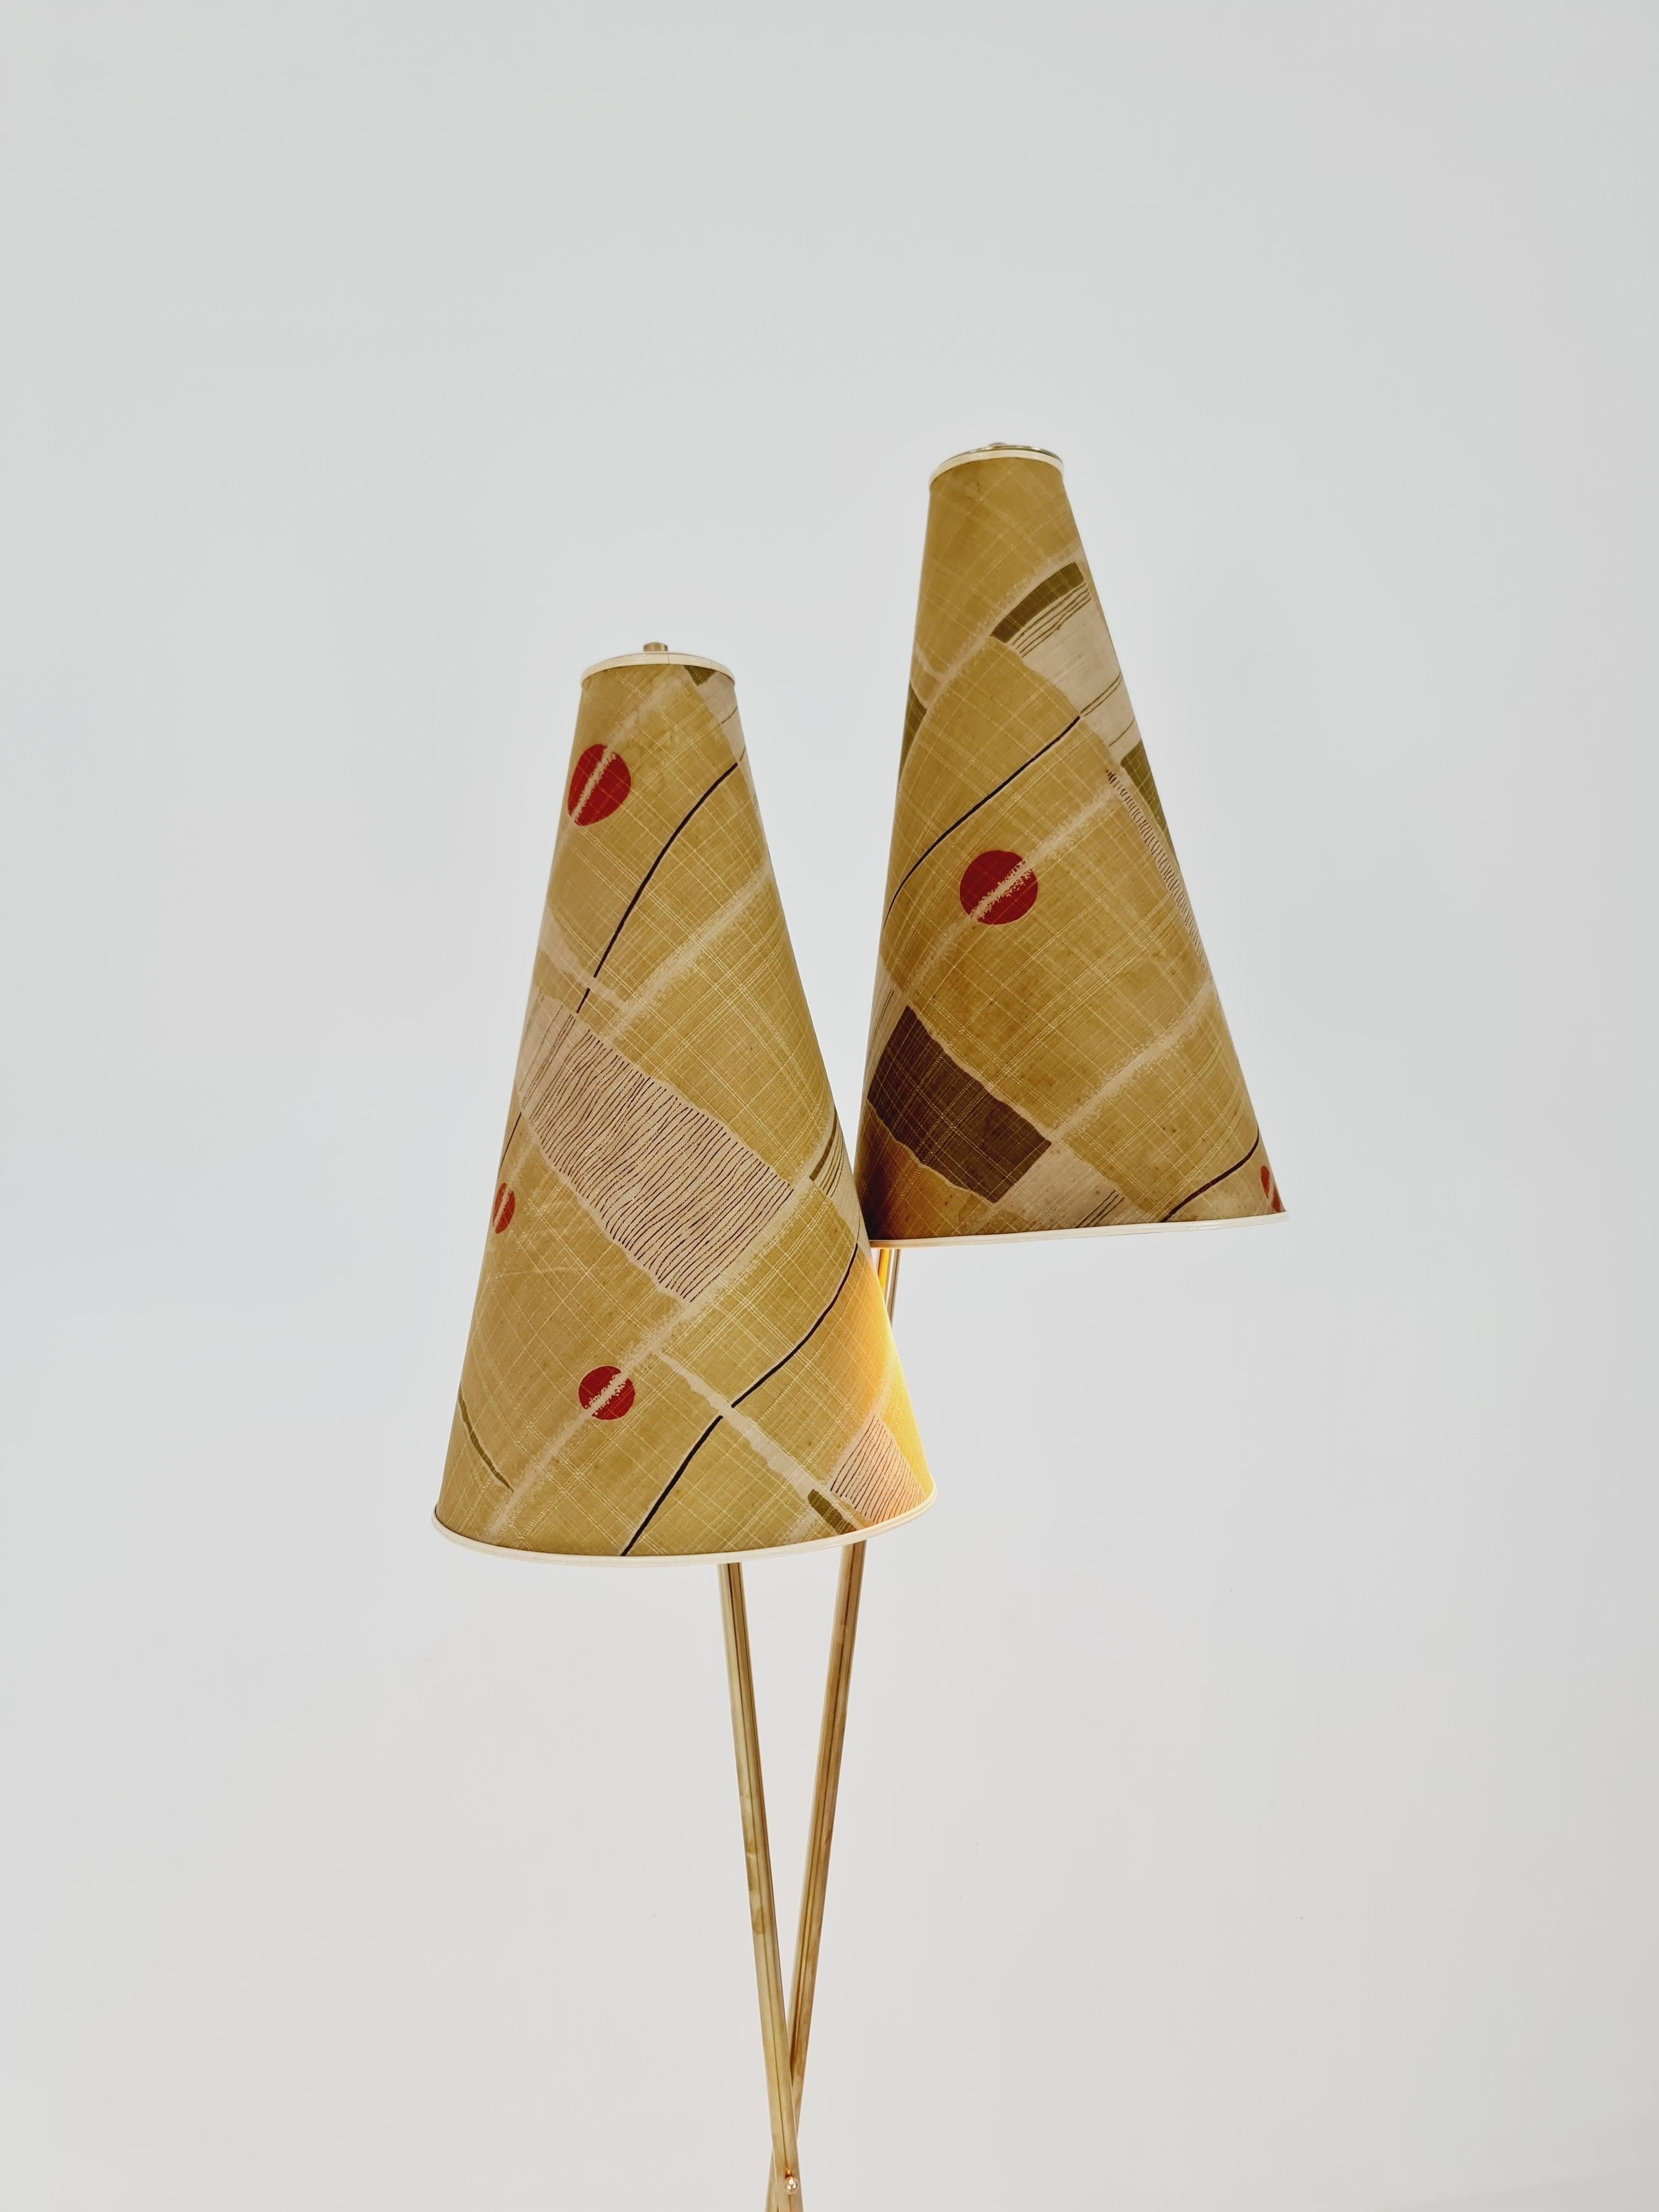 EXTREME RARE brass 1950s vintage floor lamp / bag lamp mcm In Good Condition For Sale In Gaggenau, DE